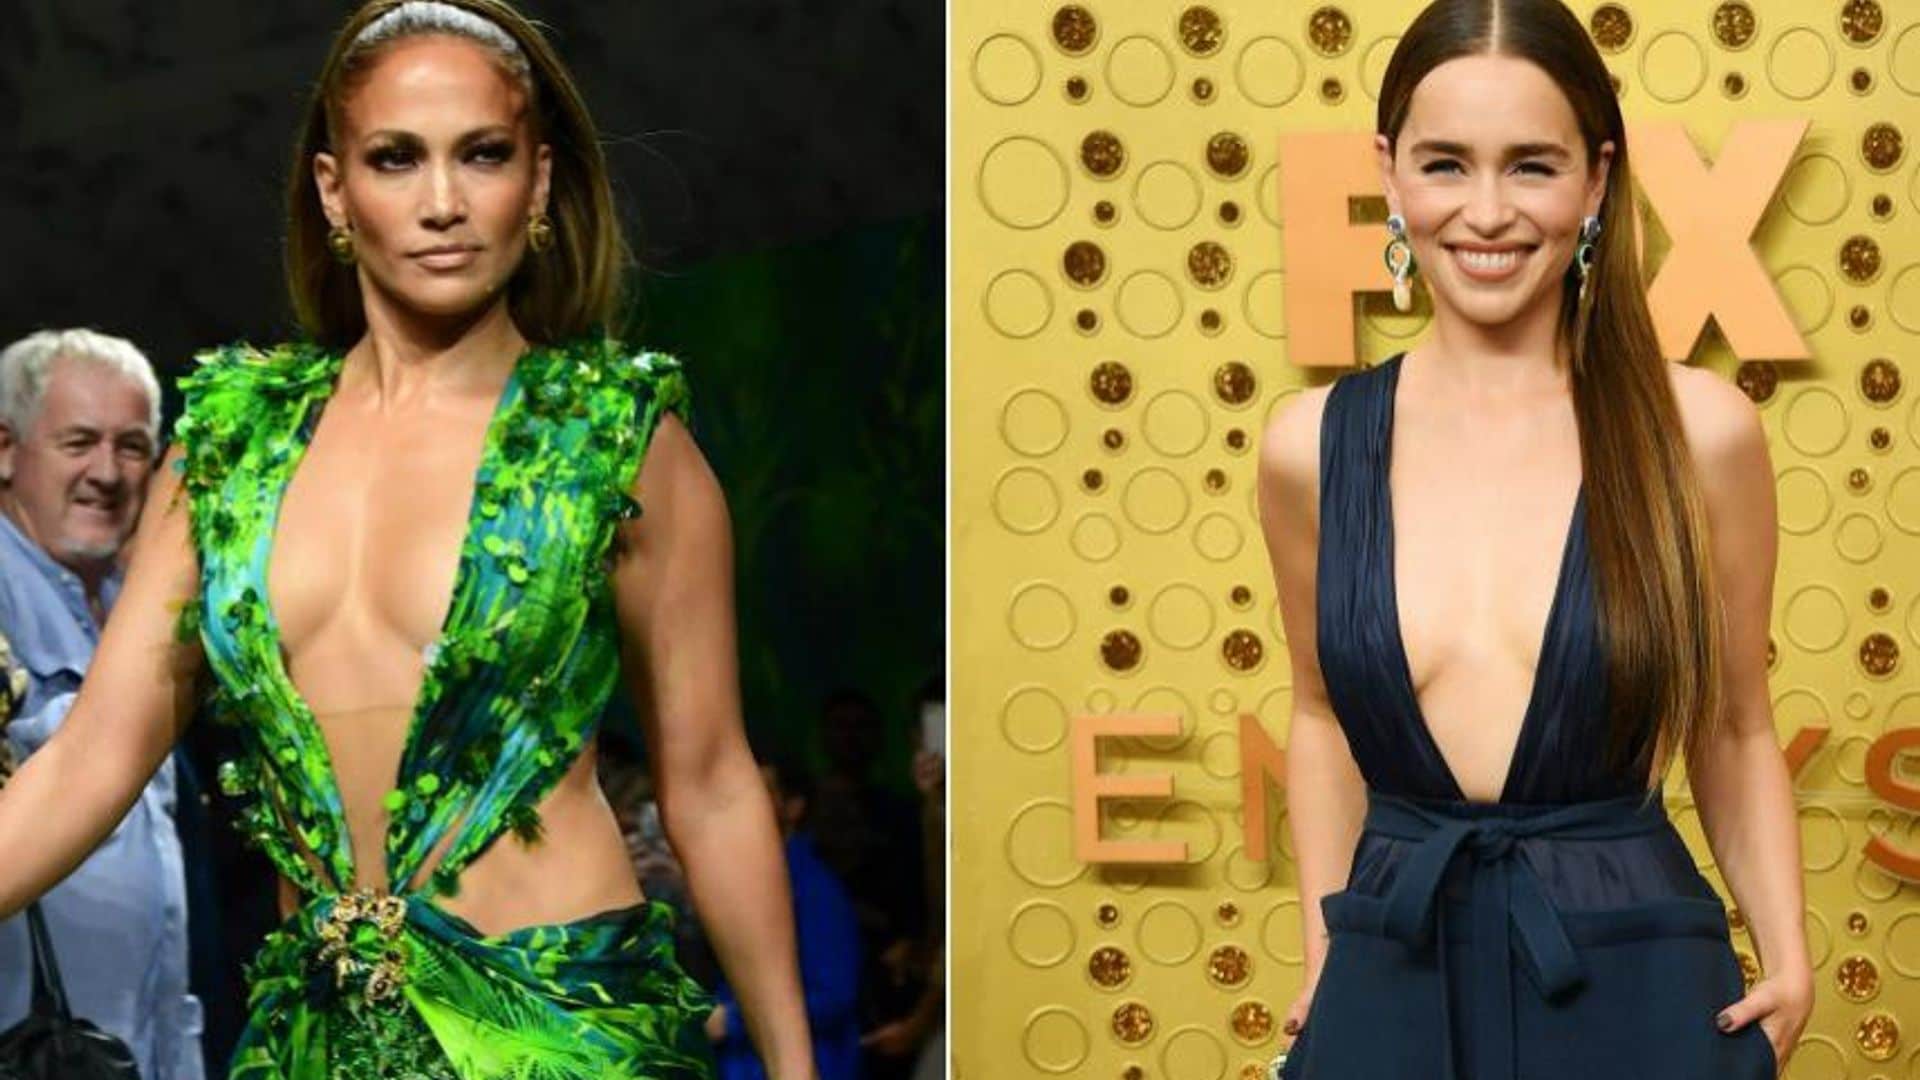 JLo reacts to Emilia Clarke channeling her at Emmys 2019